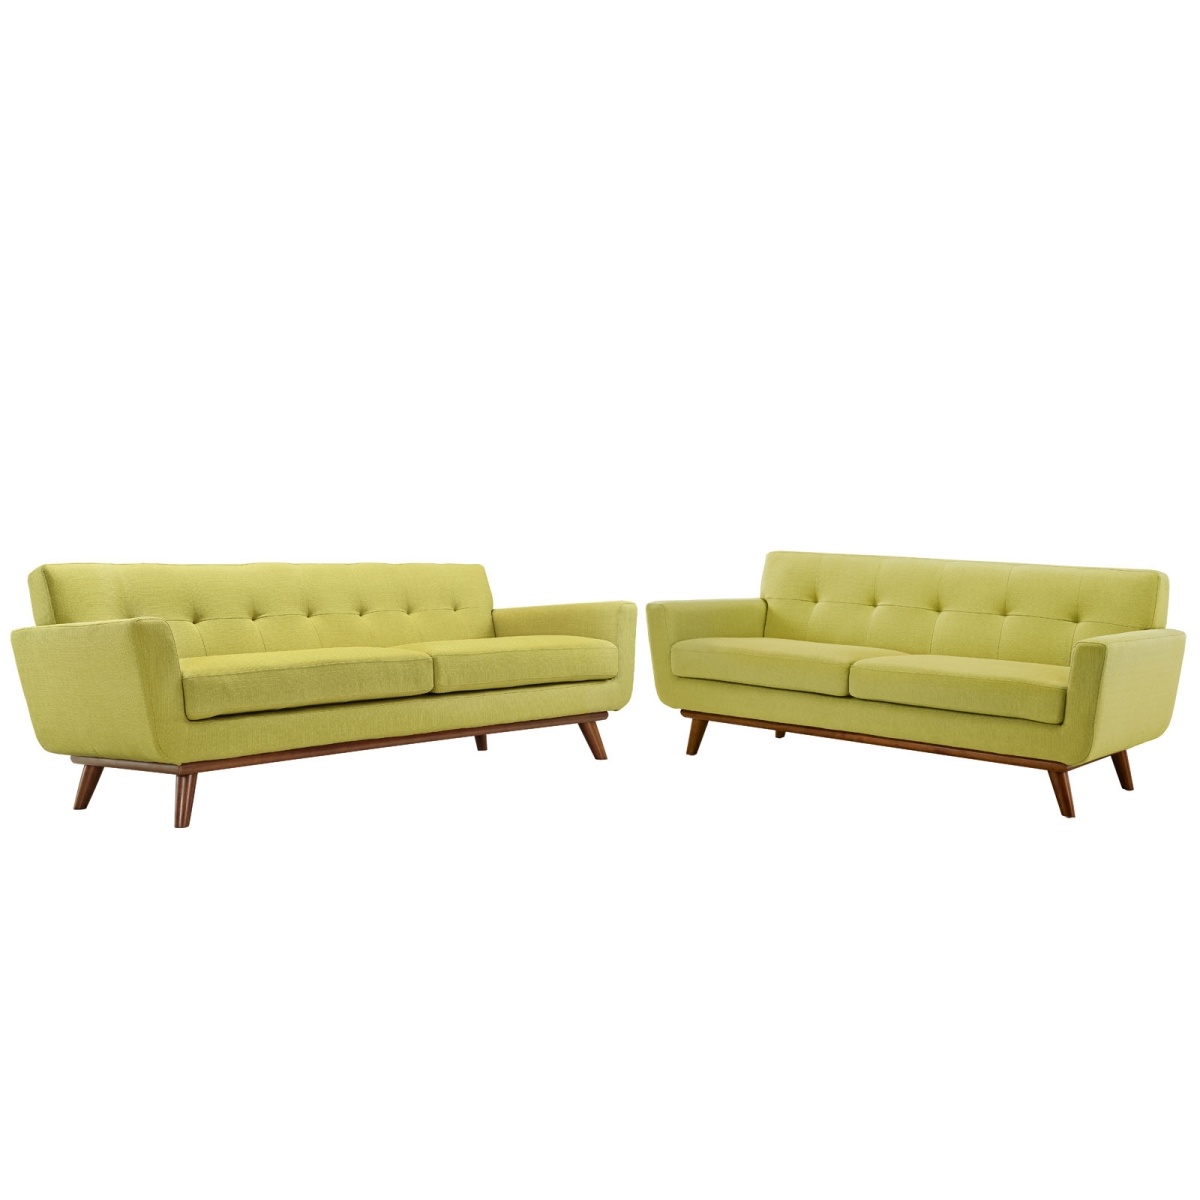 Eastend Eei-1348-whe Engage Loveseat & Sofa In Tufted Wheat Fabric With Cherry Finished Wood Legs